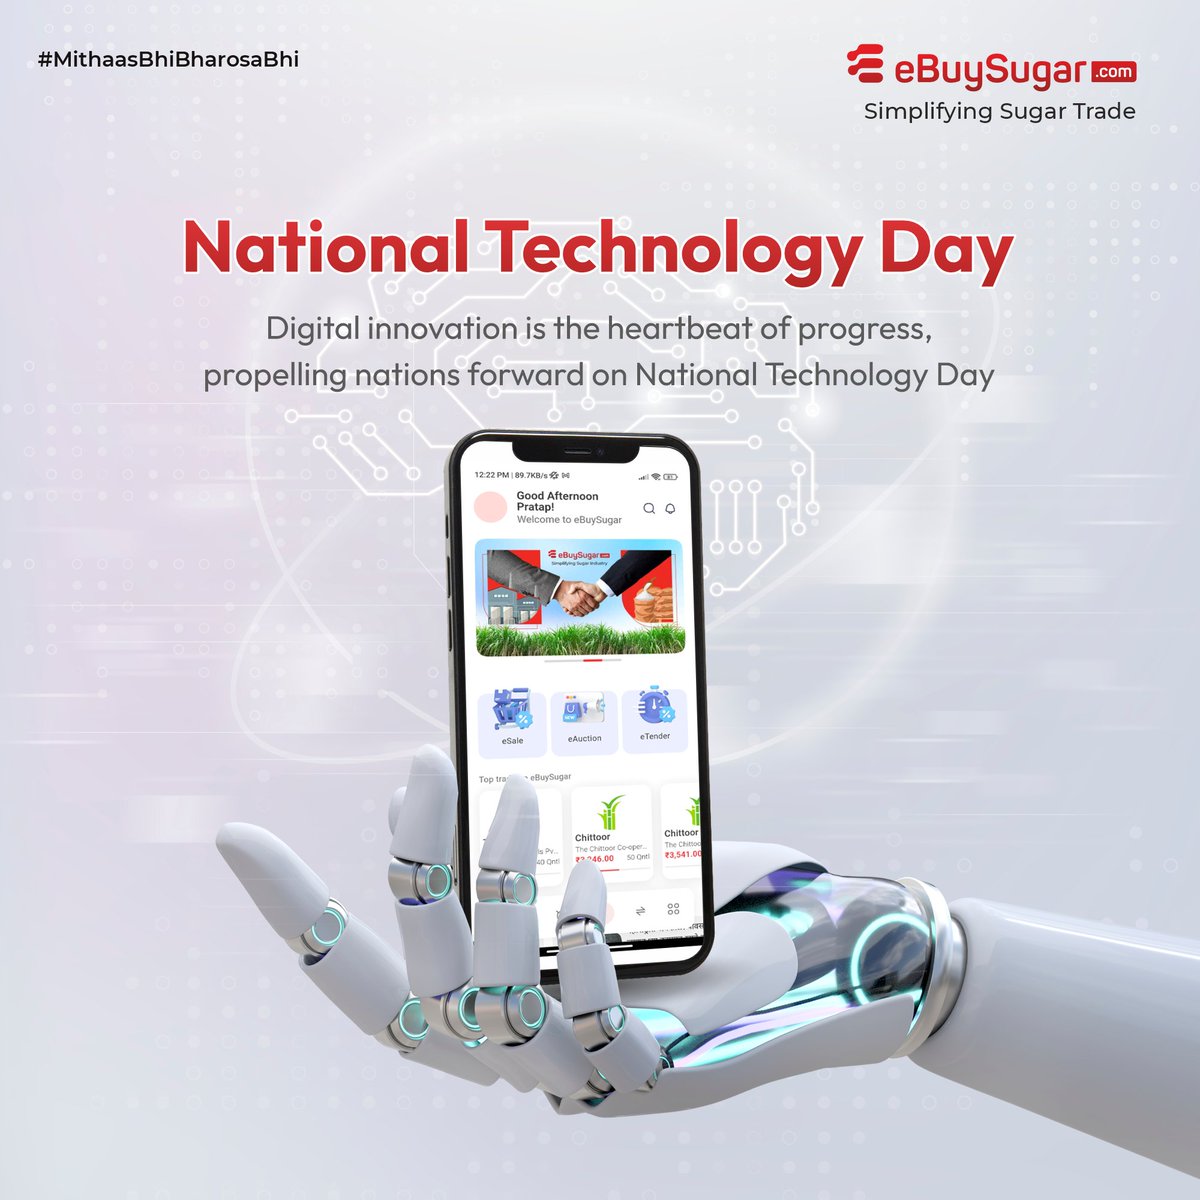 Happy National Technology Day! 📱 💻 At eBuySugar.com, we're revolutionizing the sugar industry with innovative digital solutions, empowering sellers & buyers alike to thrive in a dynamic marketplace. 🤝 #NationalTechnologyDay #DigitalInnovation #SugarIndustry